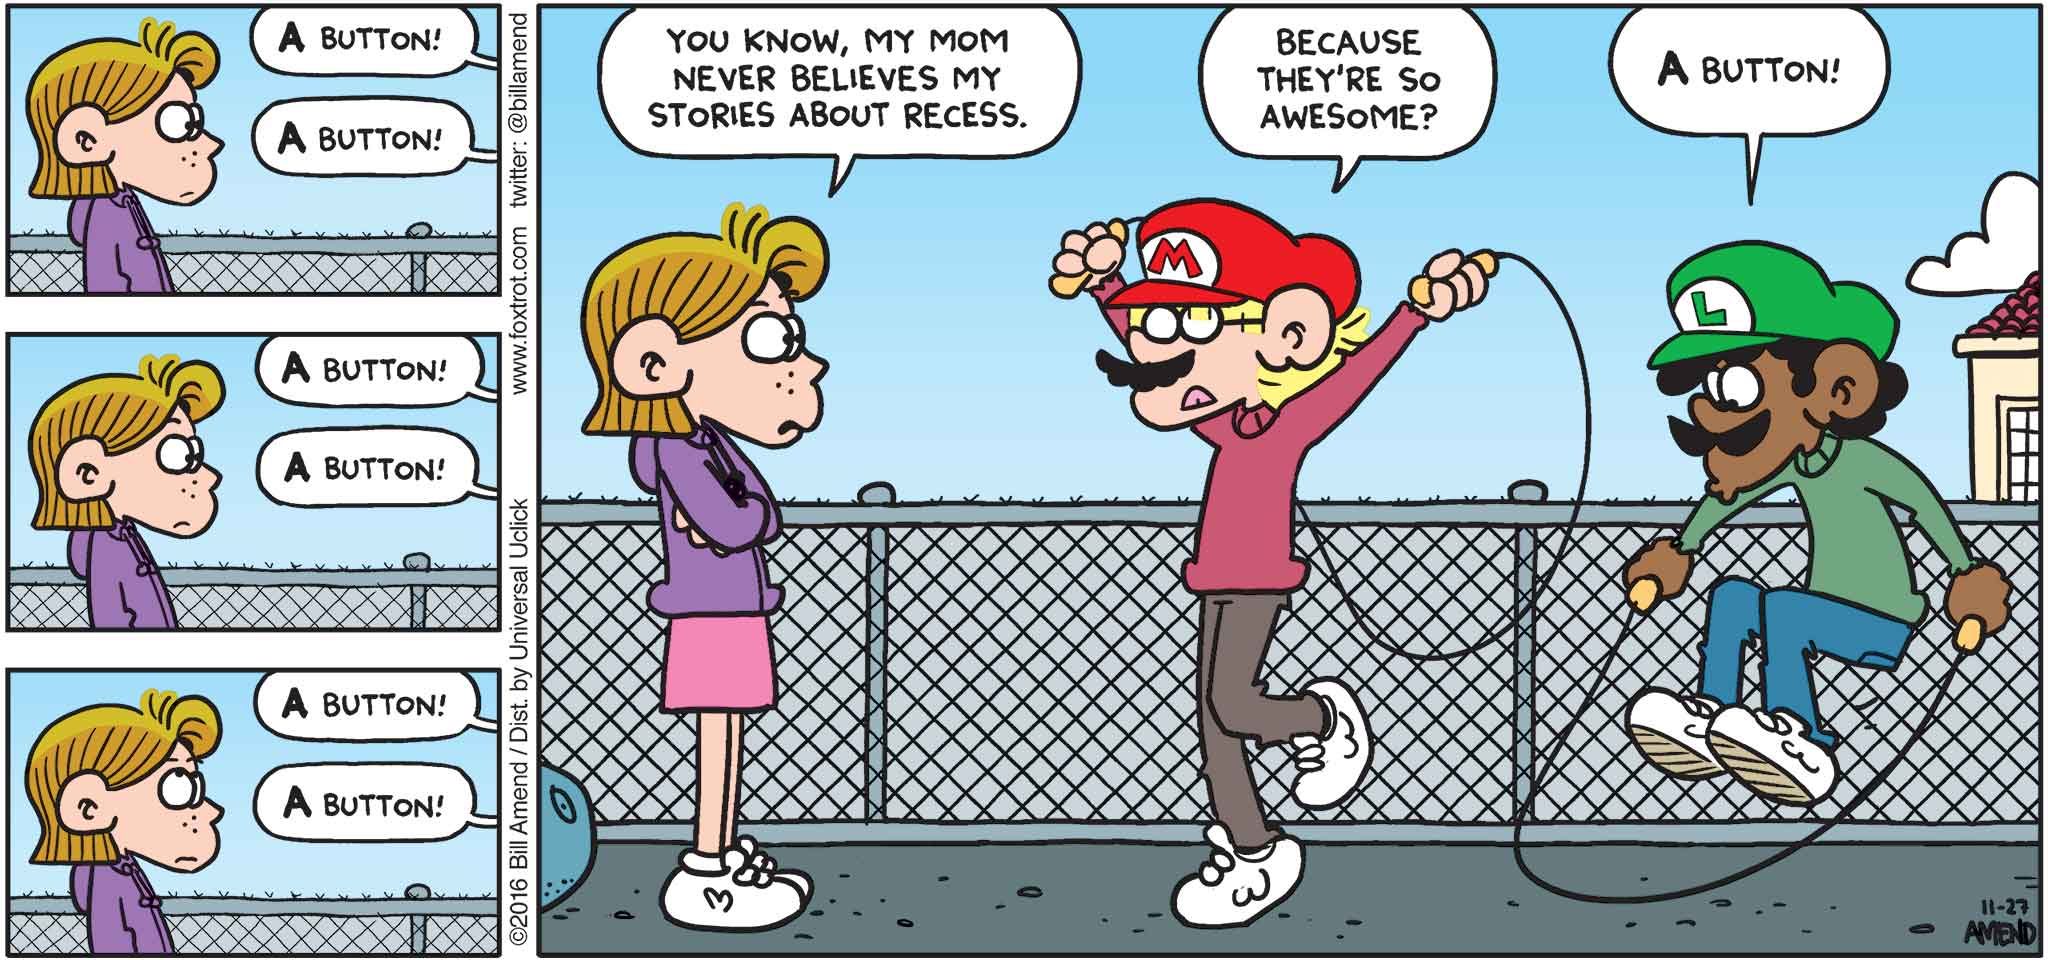 FoxTrot by Bill Amend - "Super Rope Bros" published November 27, 2016 - A button! A button! A button! A button! A button! A button! Eileen: You know, my mom never believes my stories about recess. Jason: Because they're so awesome? Marcus: A button!